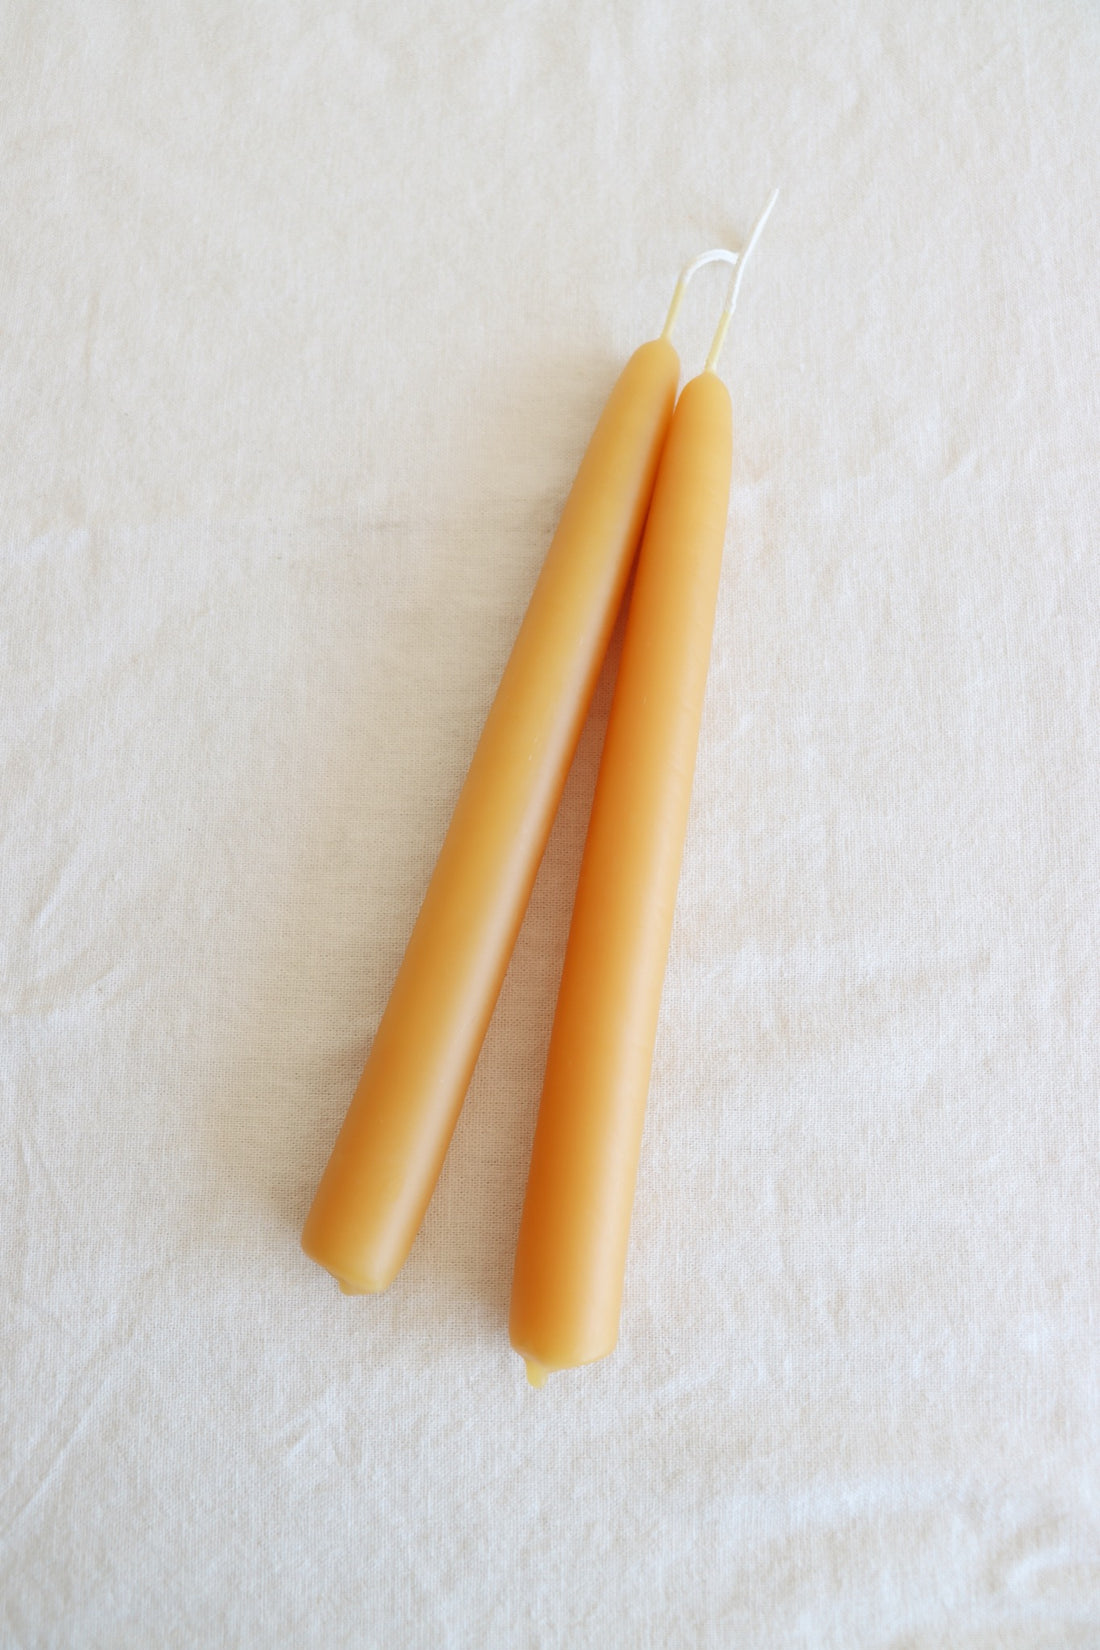 Beeswax Tapers